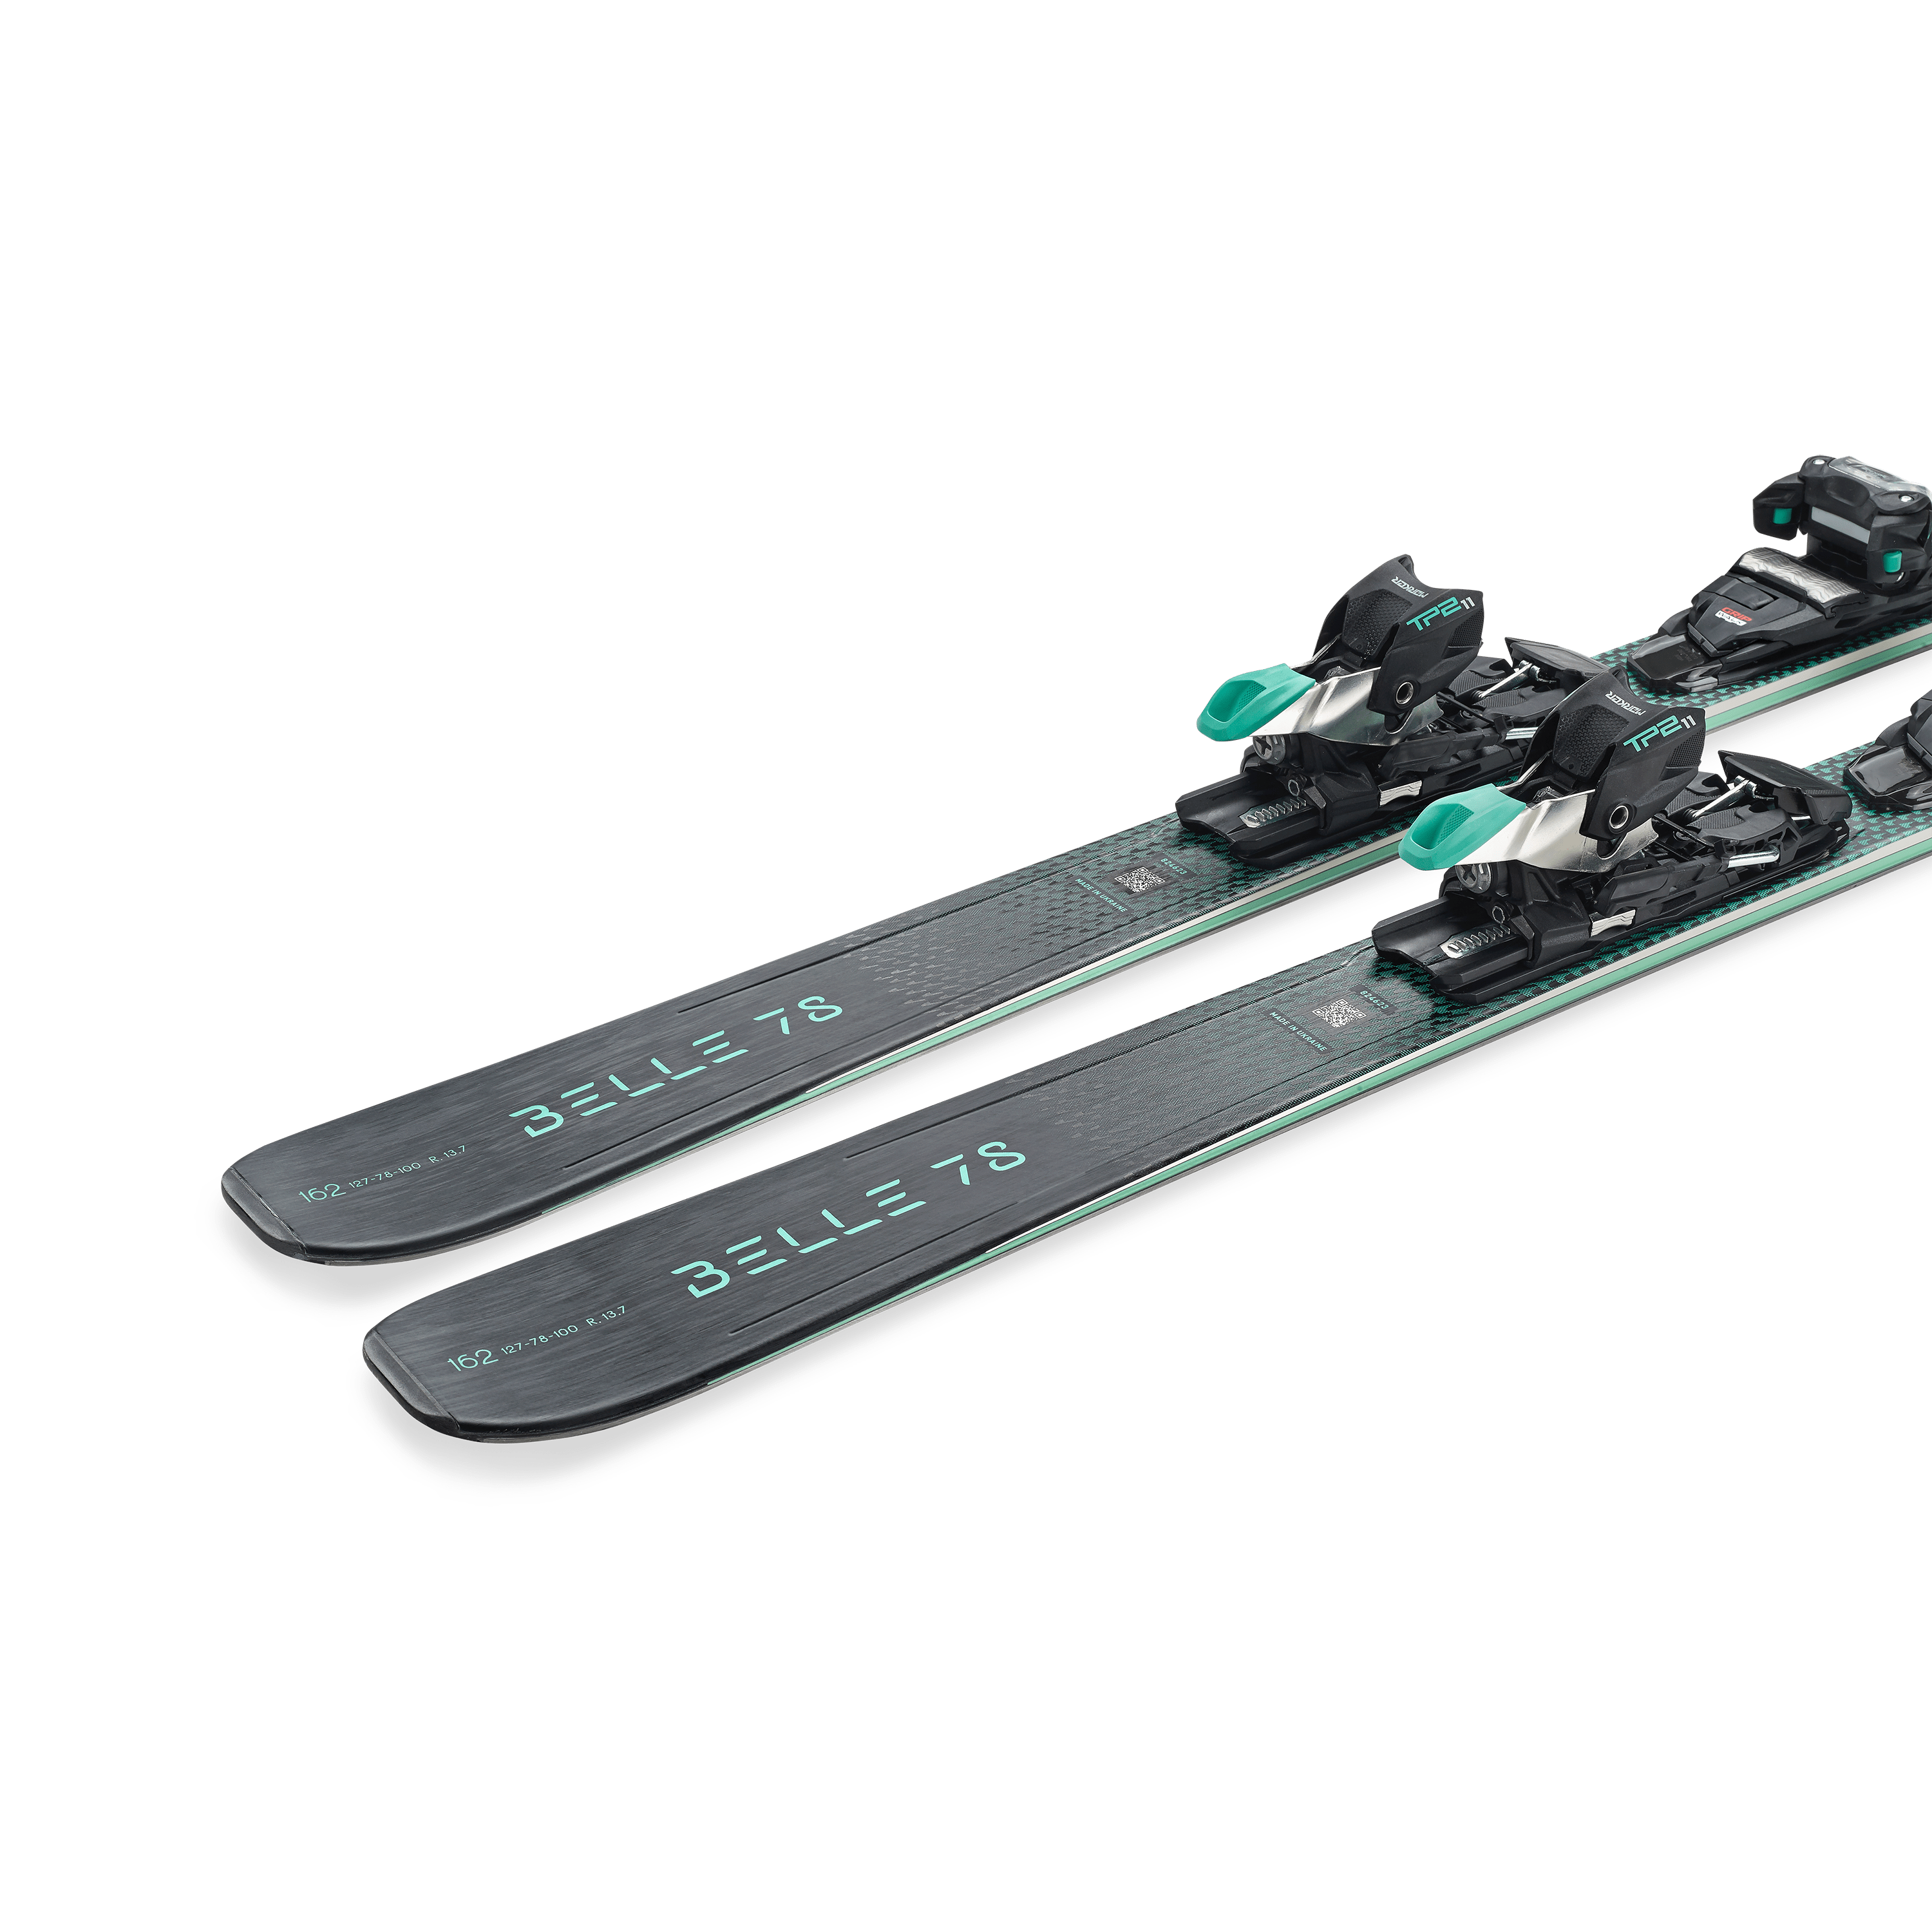 Picture of the Nordica Belle dc 78 skis.